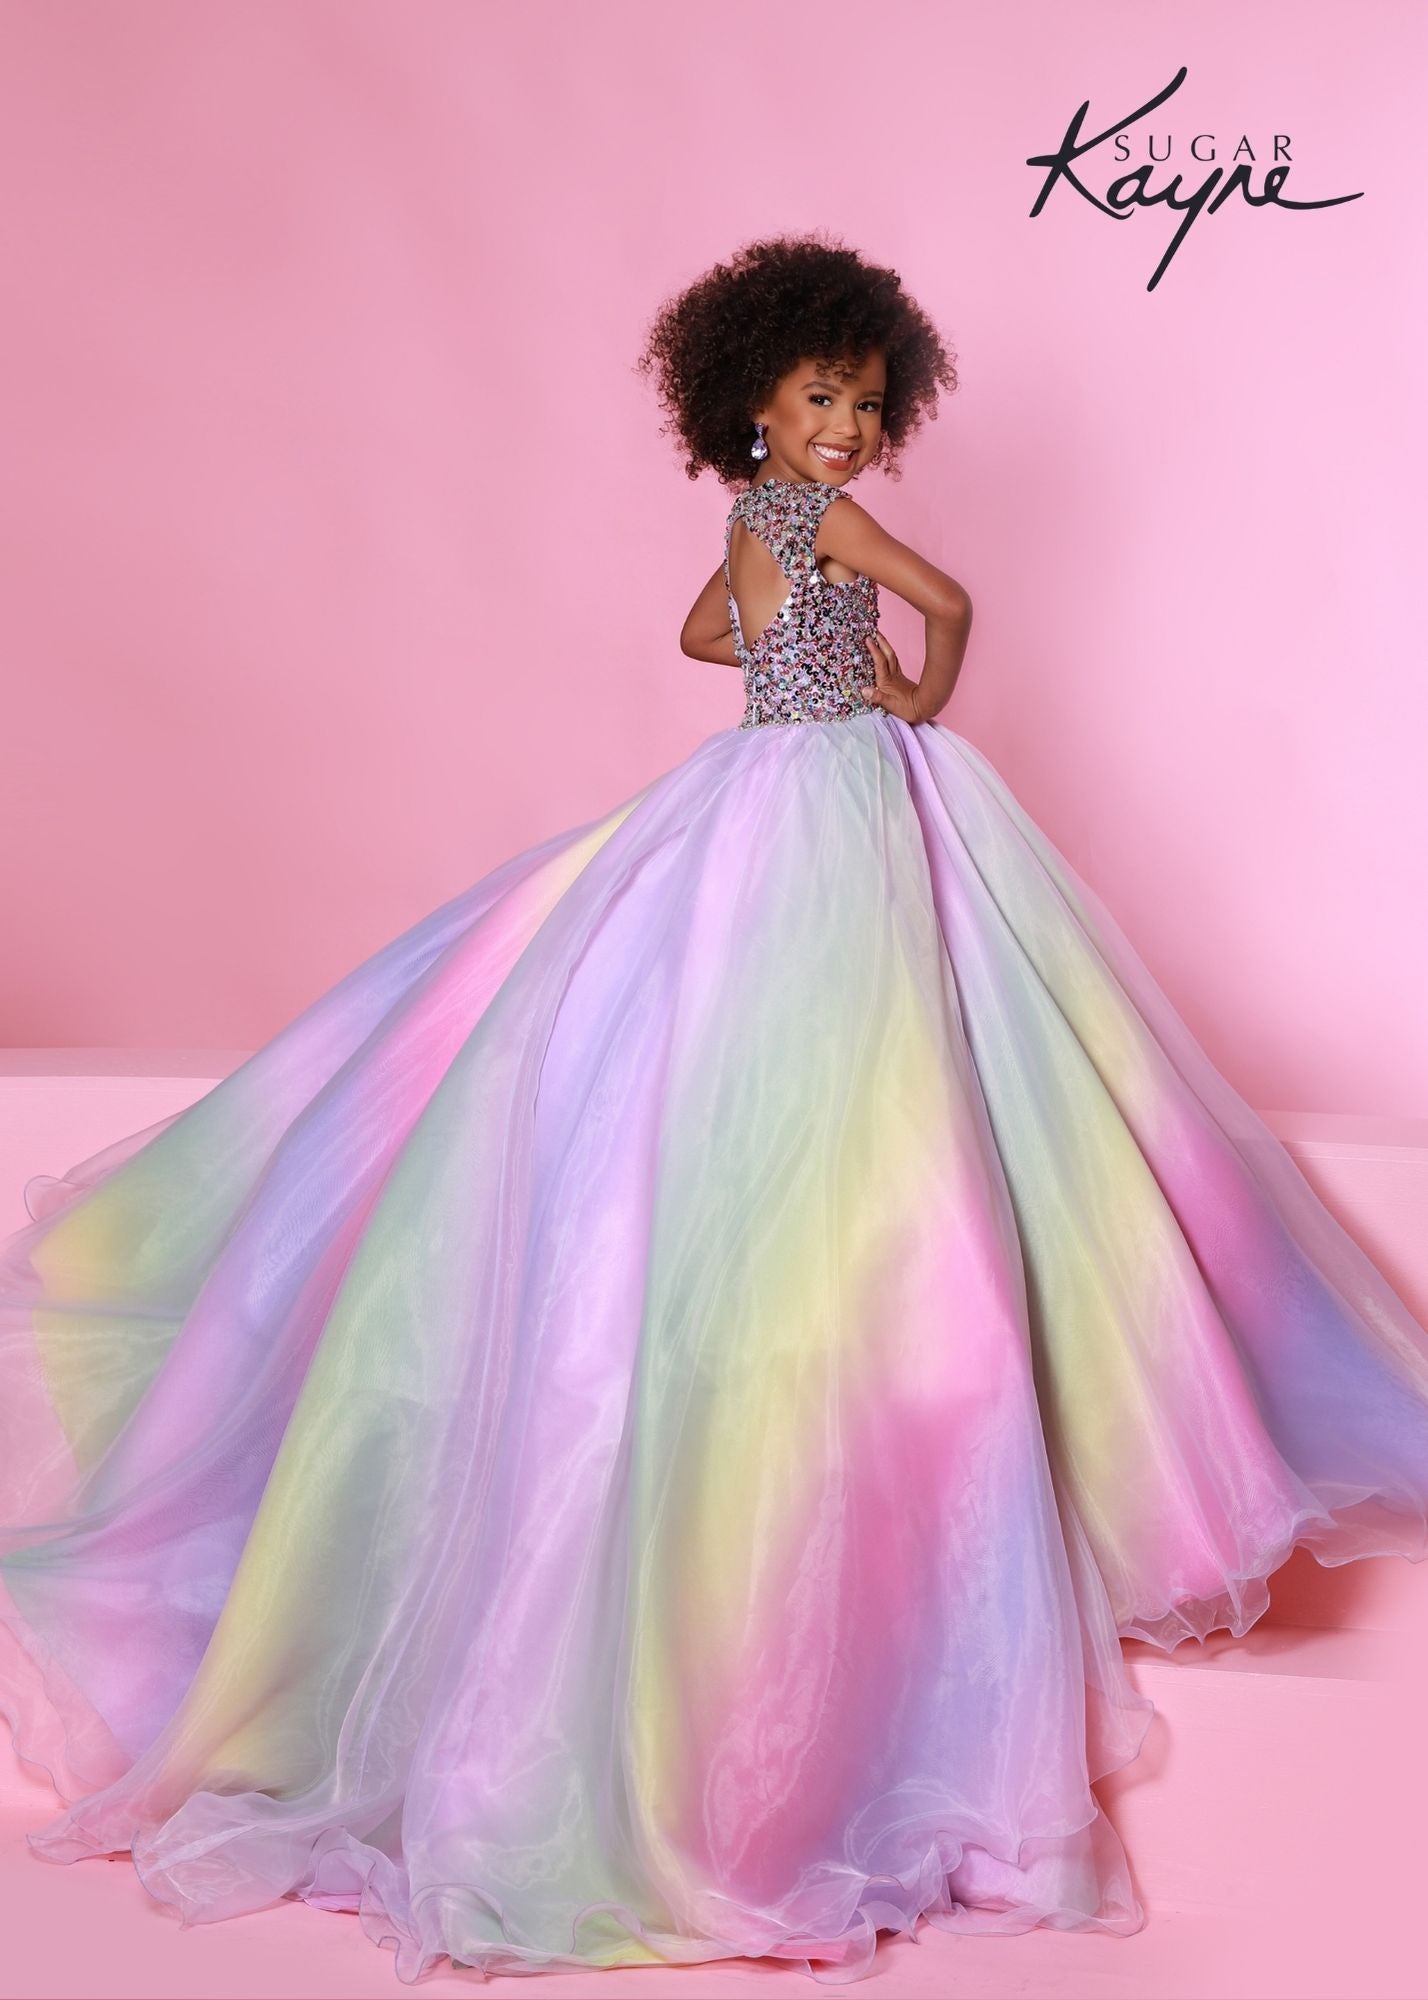 Sugar Kayne C180 This Rainbow Girls Pageant Dress is a long multi colored dress in the design of a rainbow.  The spectacular kids ballgown has small cap sleeves and a crew neckline covered in multi sequins with a cutout back.  It has an organza long rainbow skirt with an extravagant long train in the back.  Enjoy this beautiful dress while gliding over the stage. Ombre Rainbow 